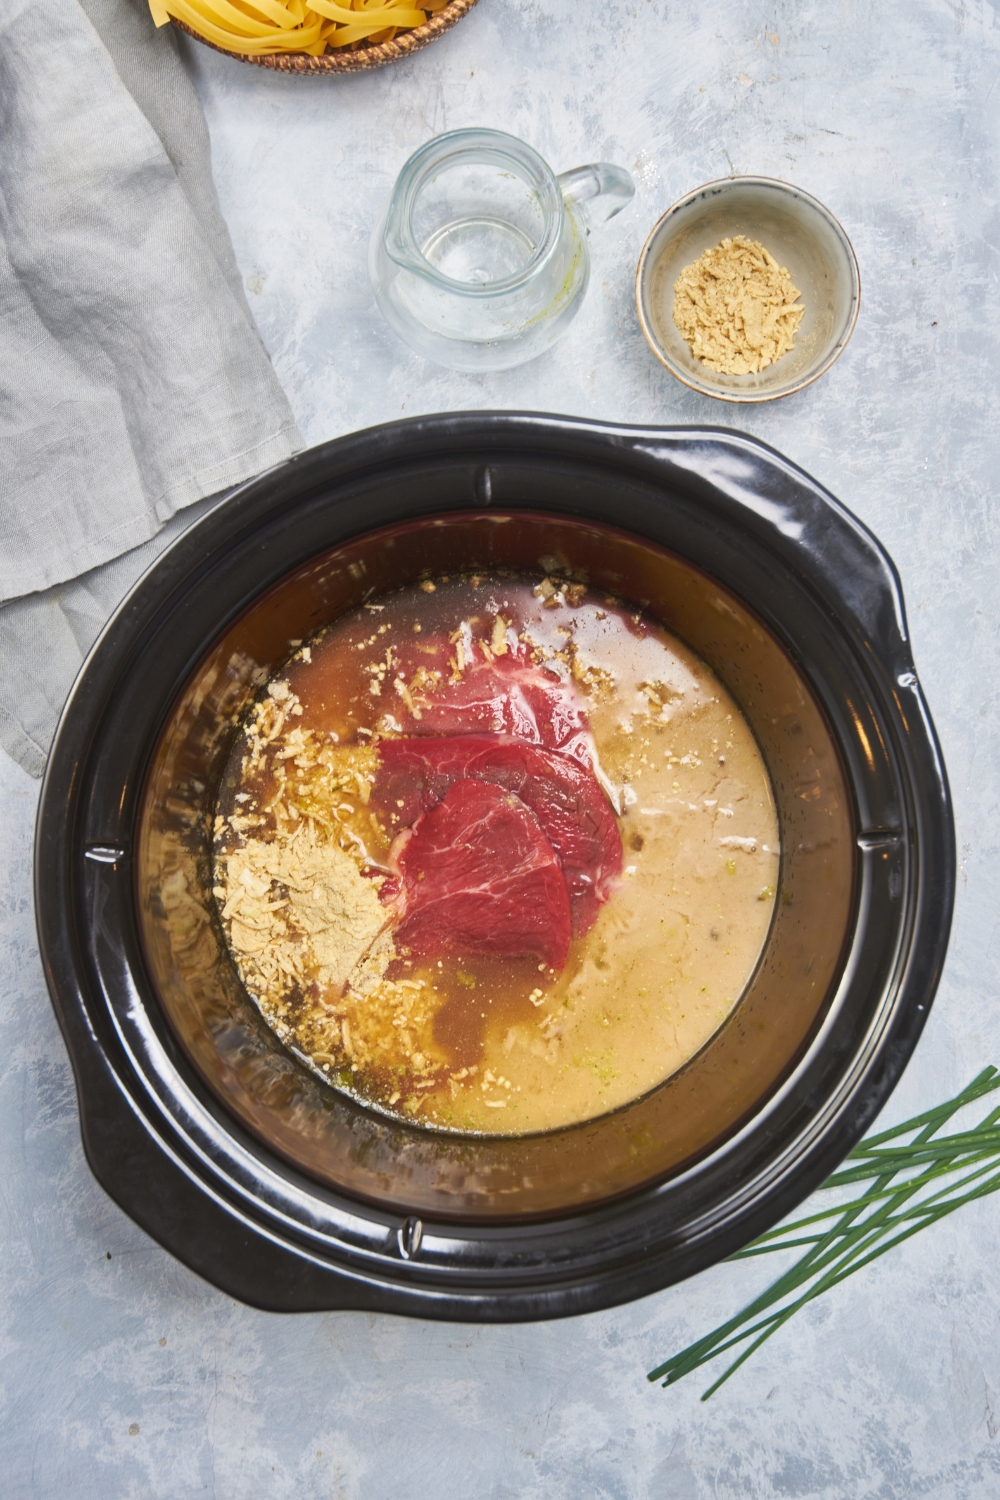 Black crockpot with raw cube steak, dry soup mix, a creamy soup mixture, and broth.